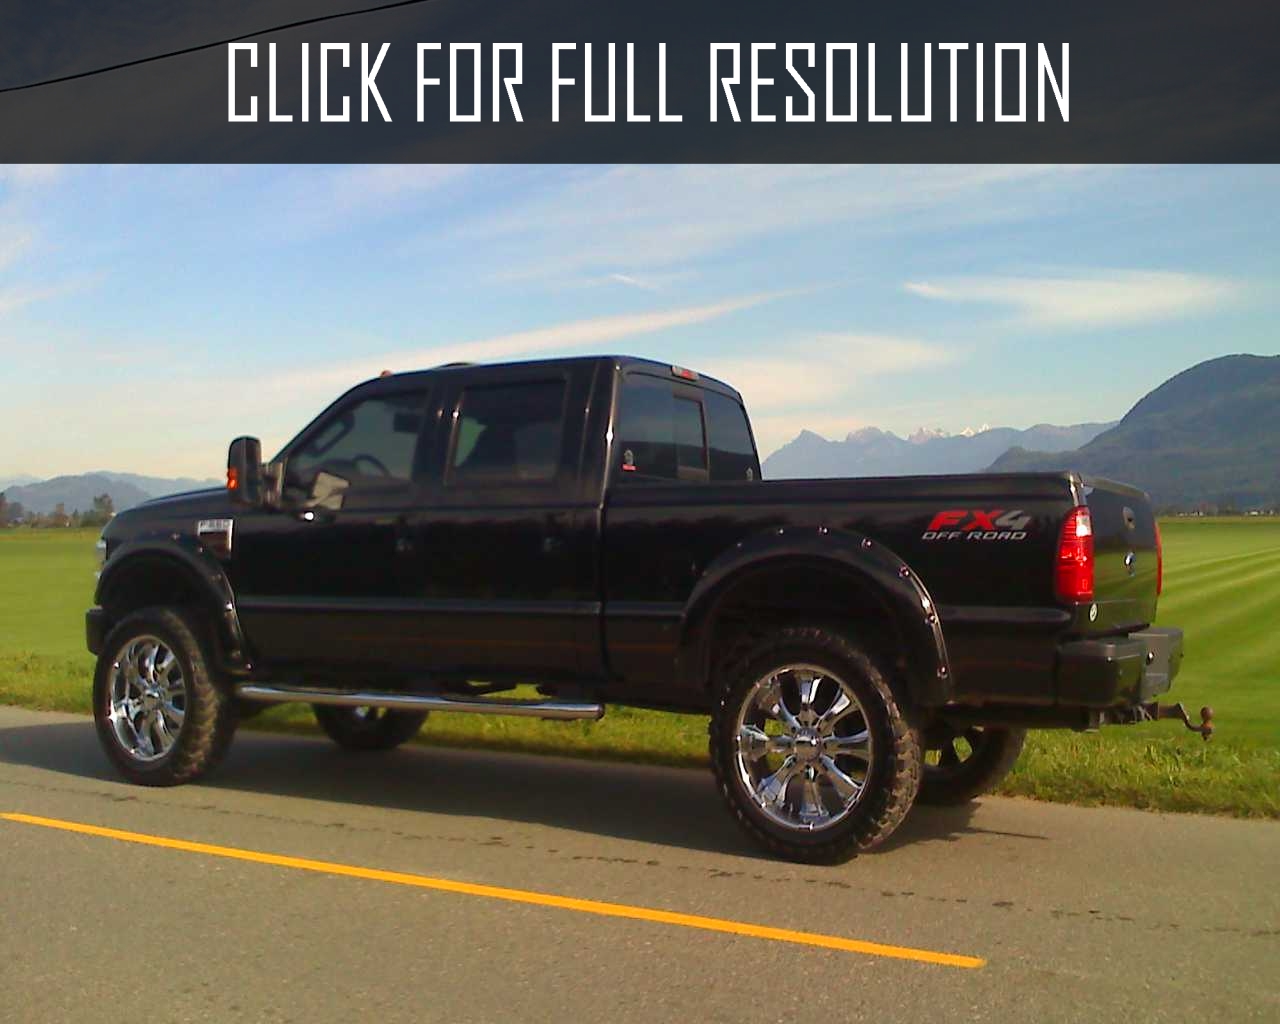 2008 Ford F350 Lifted